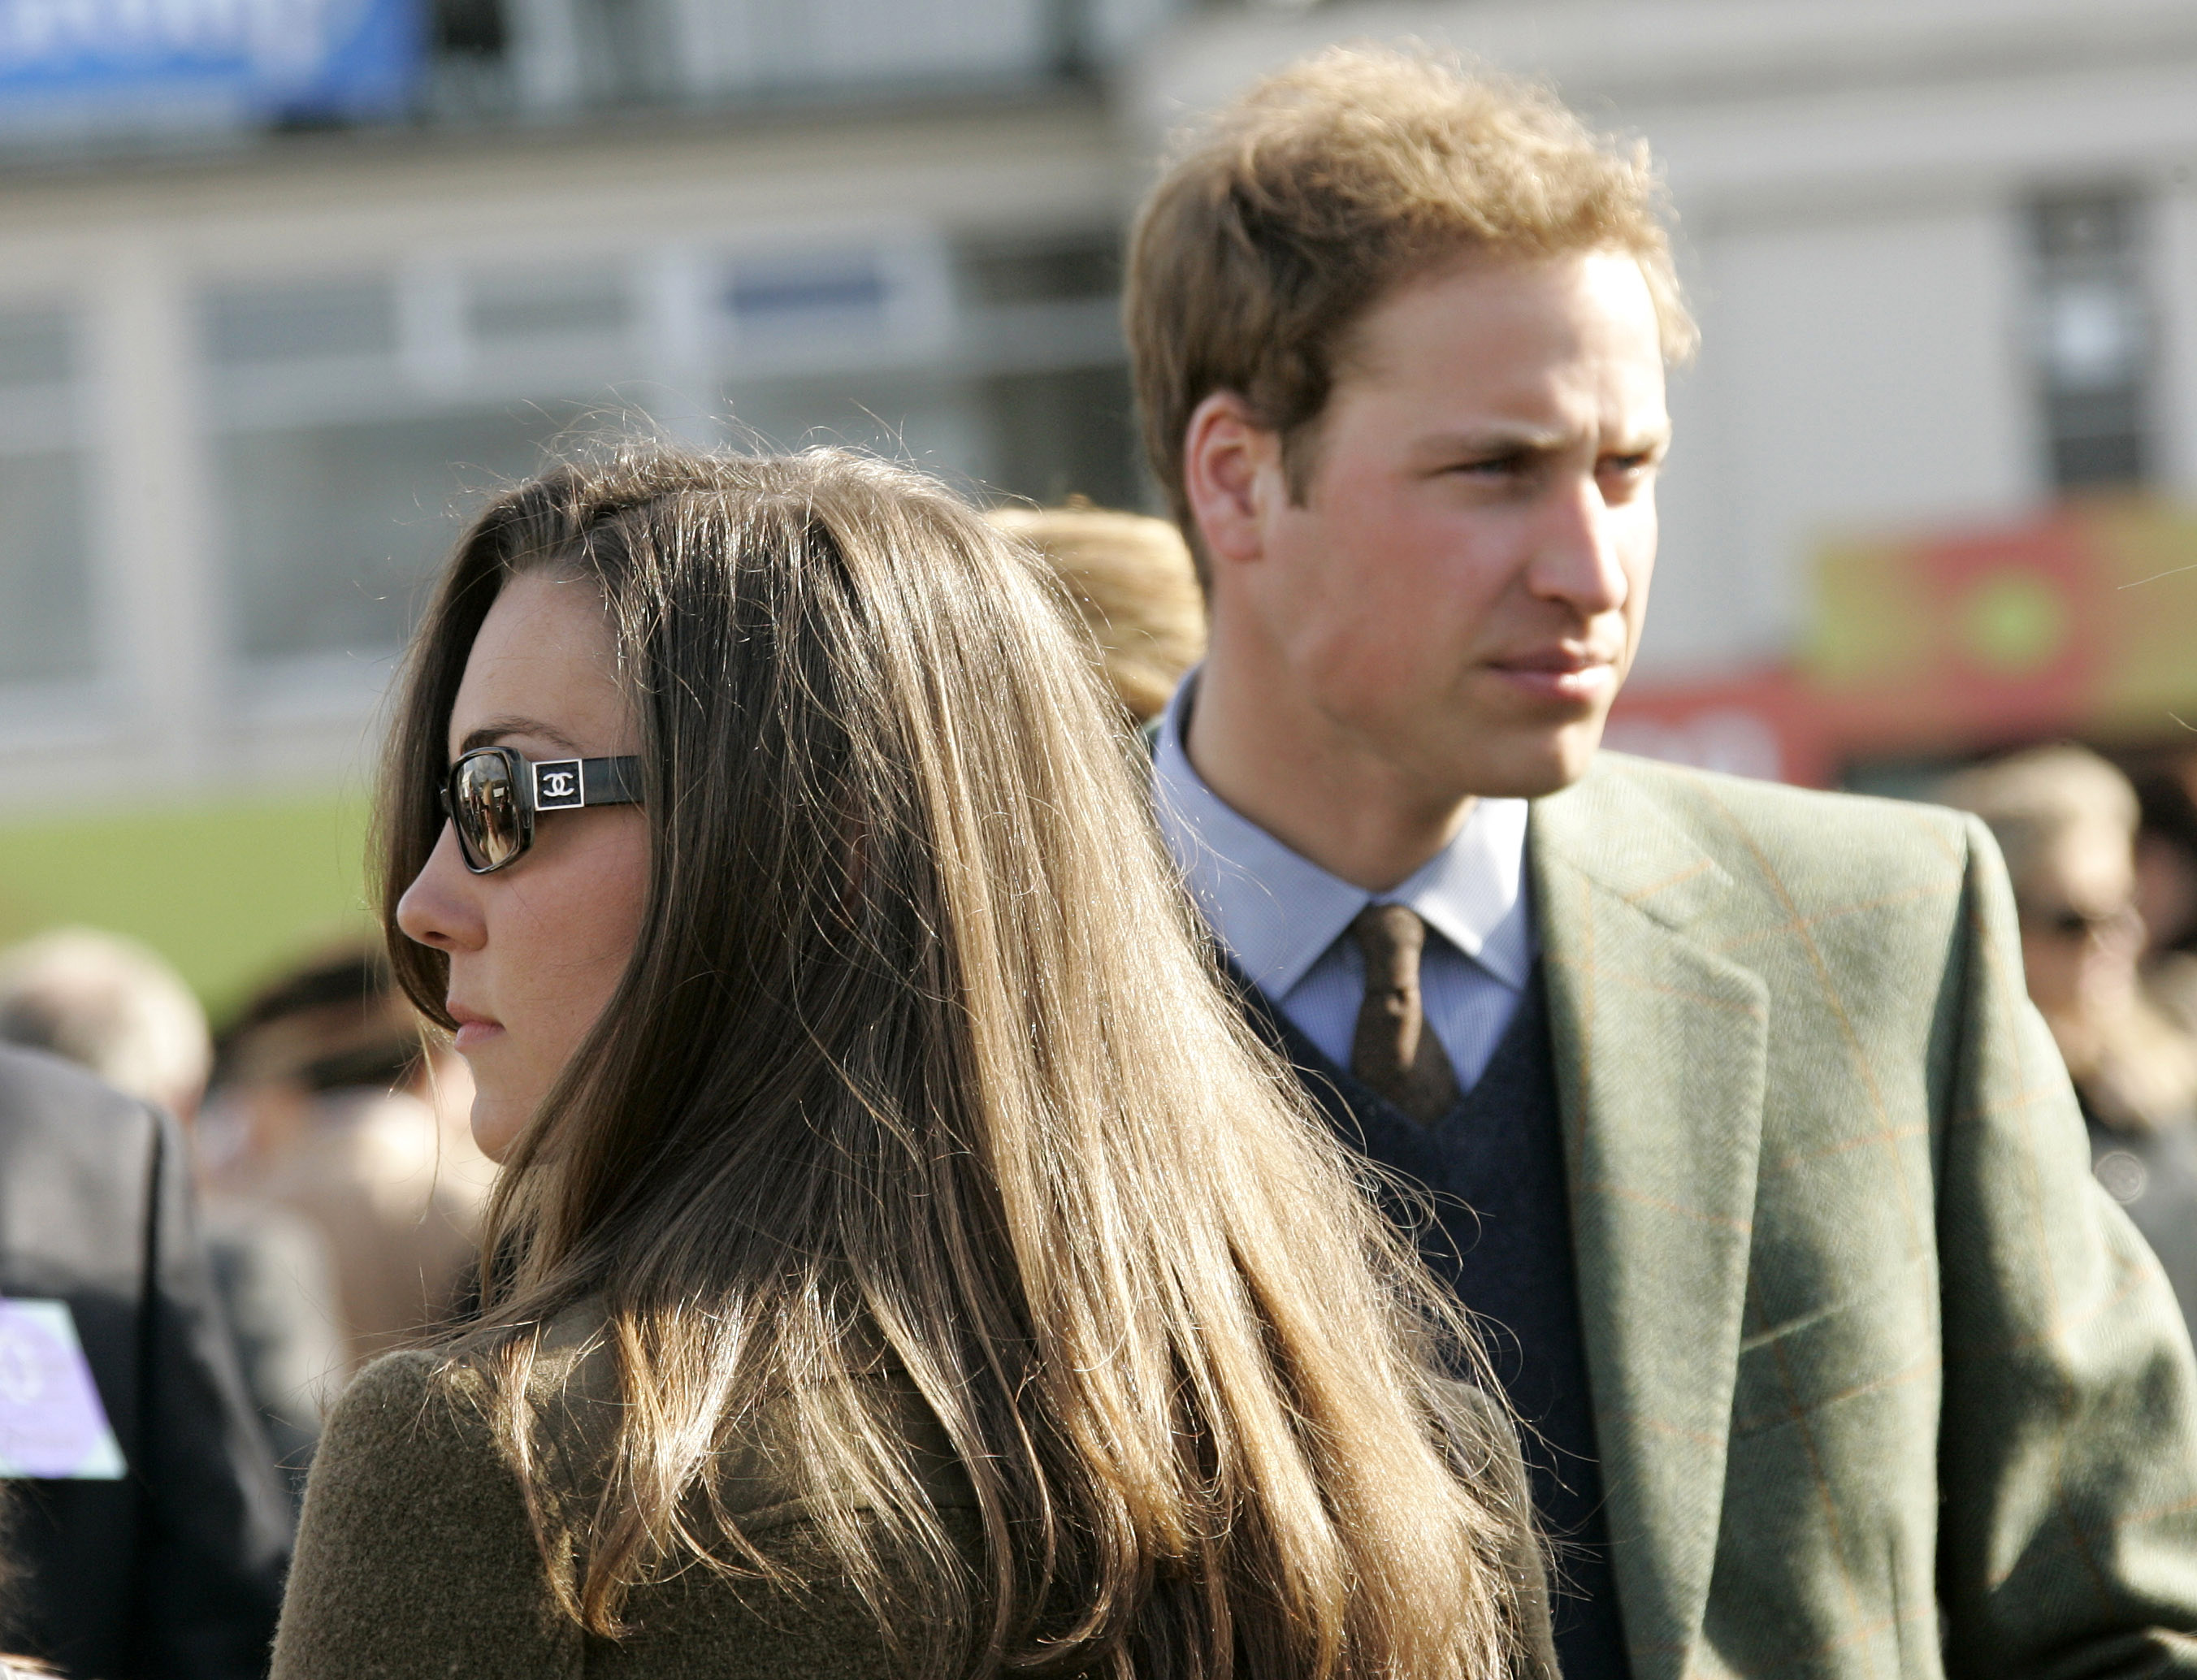 Kate Middleton and Prince William at the Cheltenham Festival Race Meeting in 2007. | Source: Getty Images